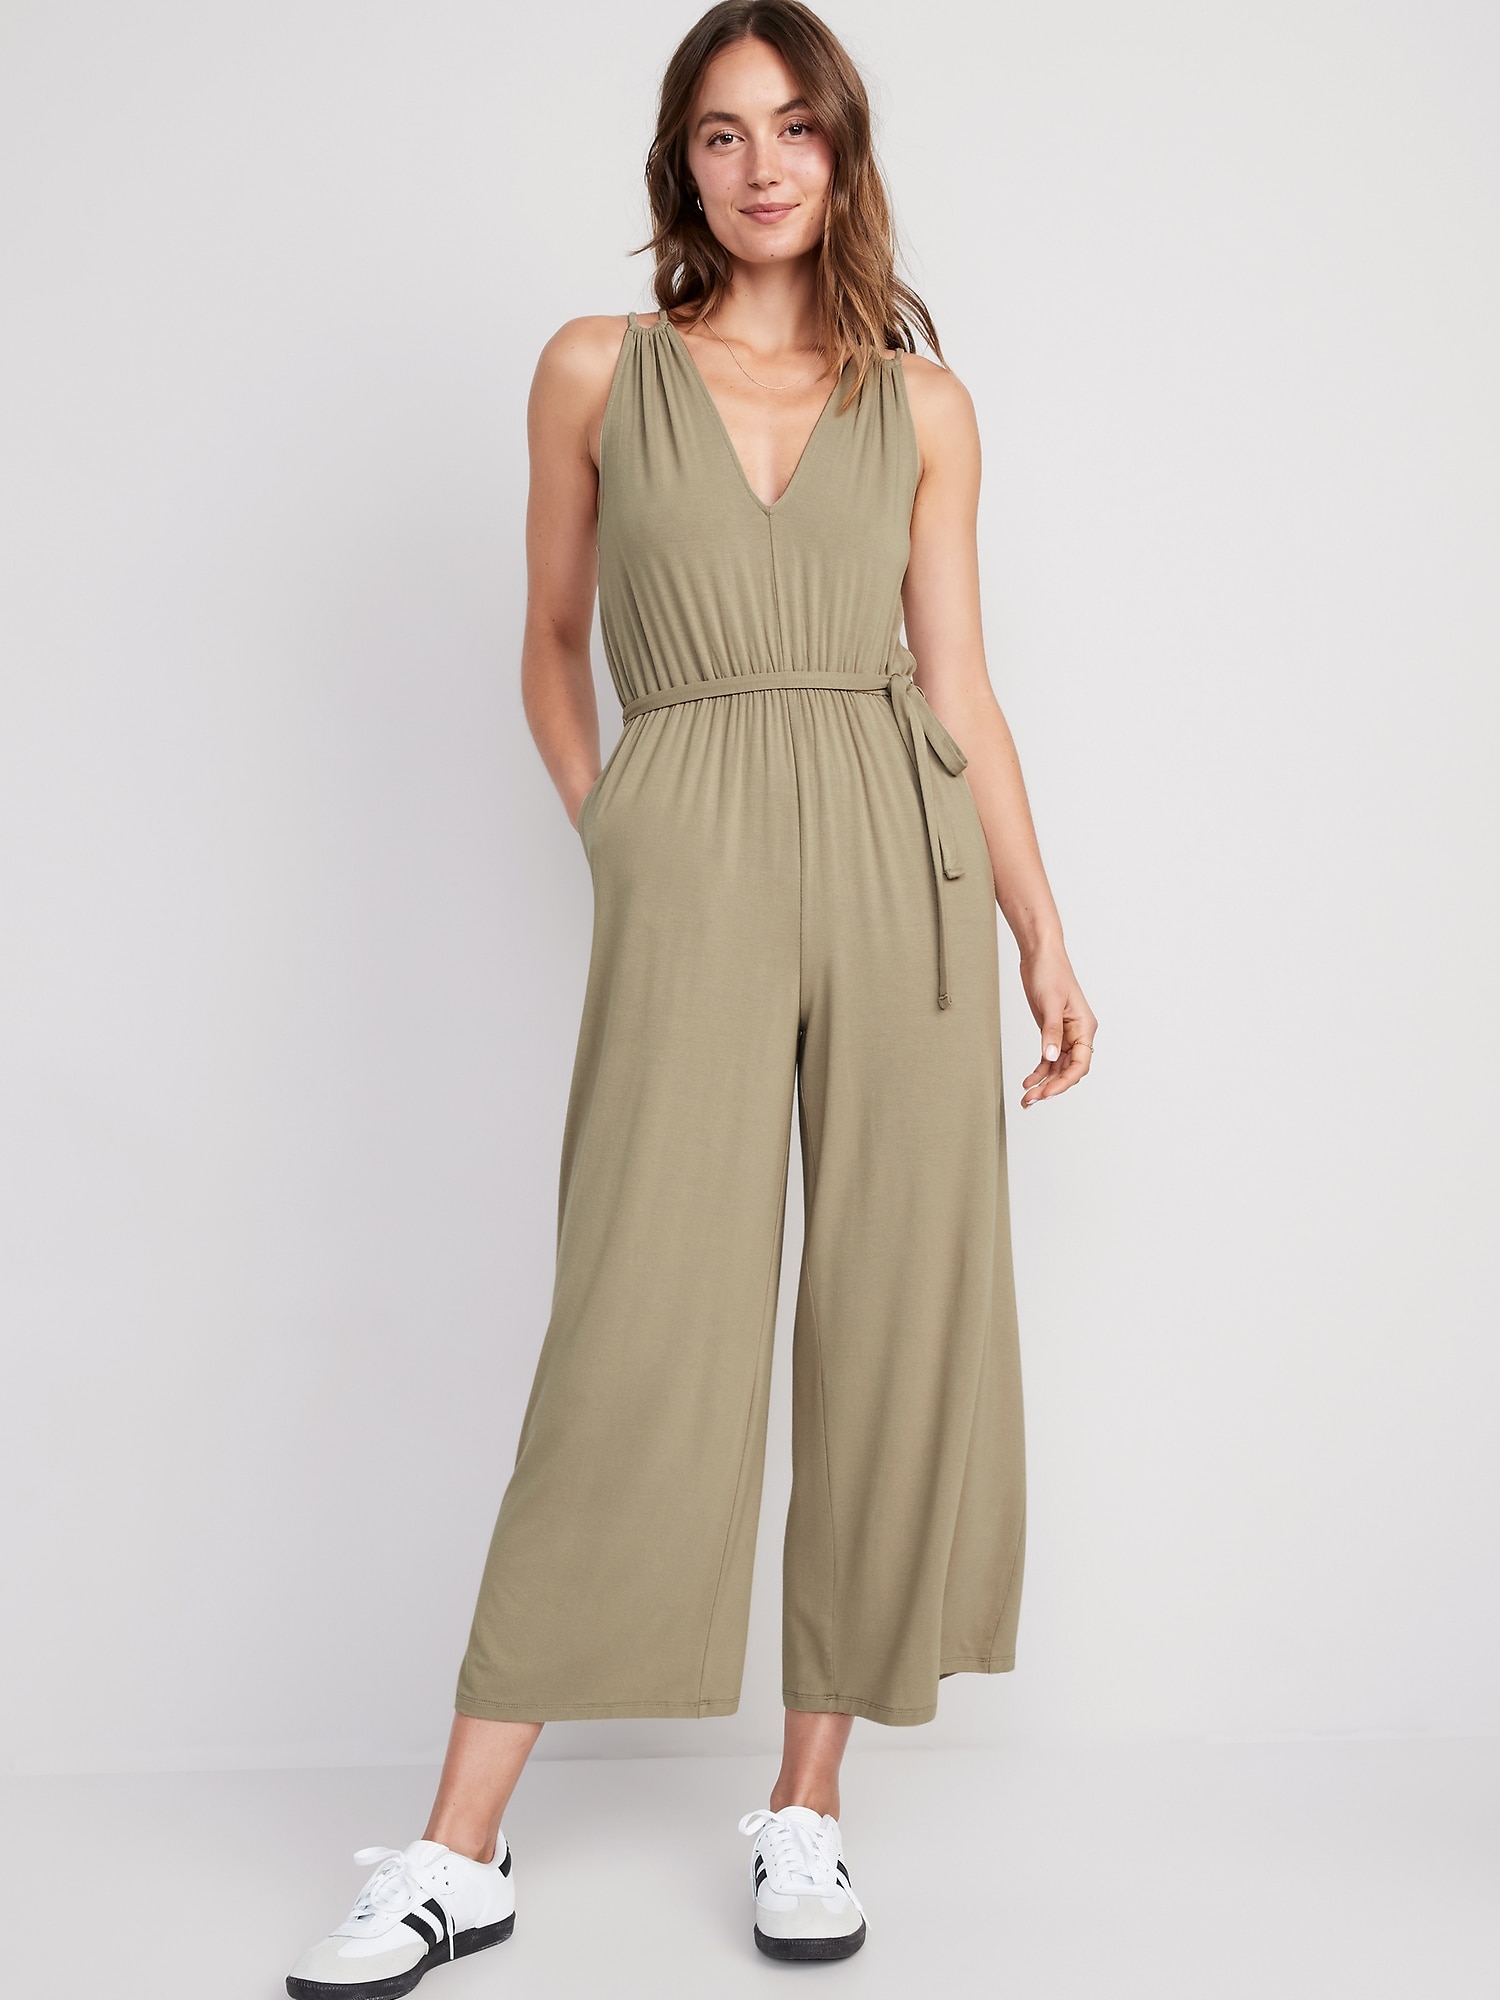 Old Navy Sleeveless Double-Strap Ankle-Length Jumpsuit for Women green. 1